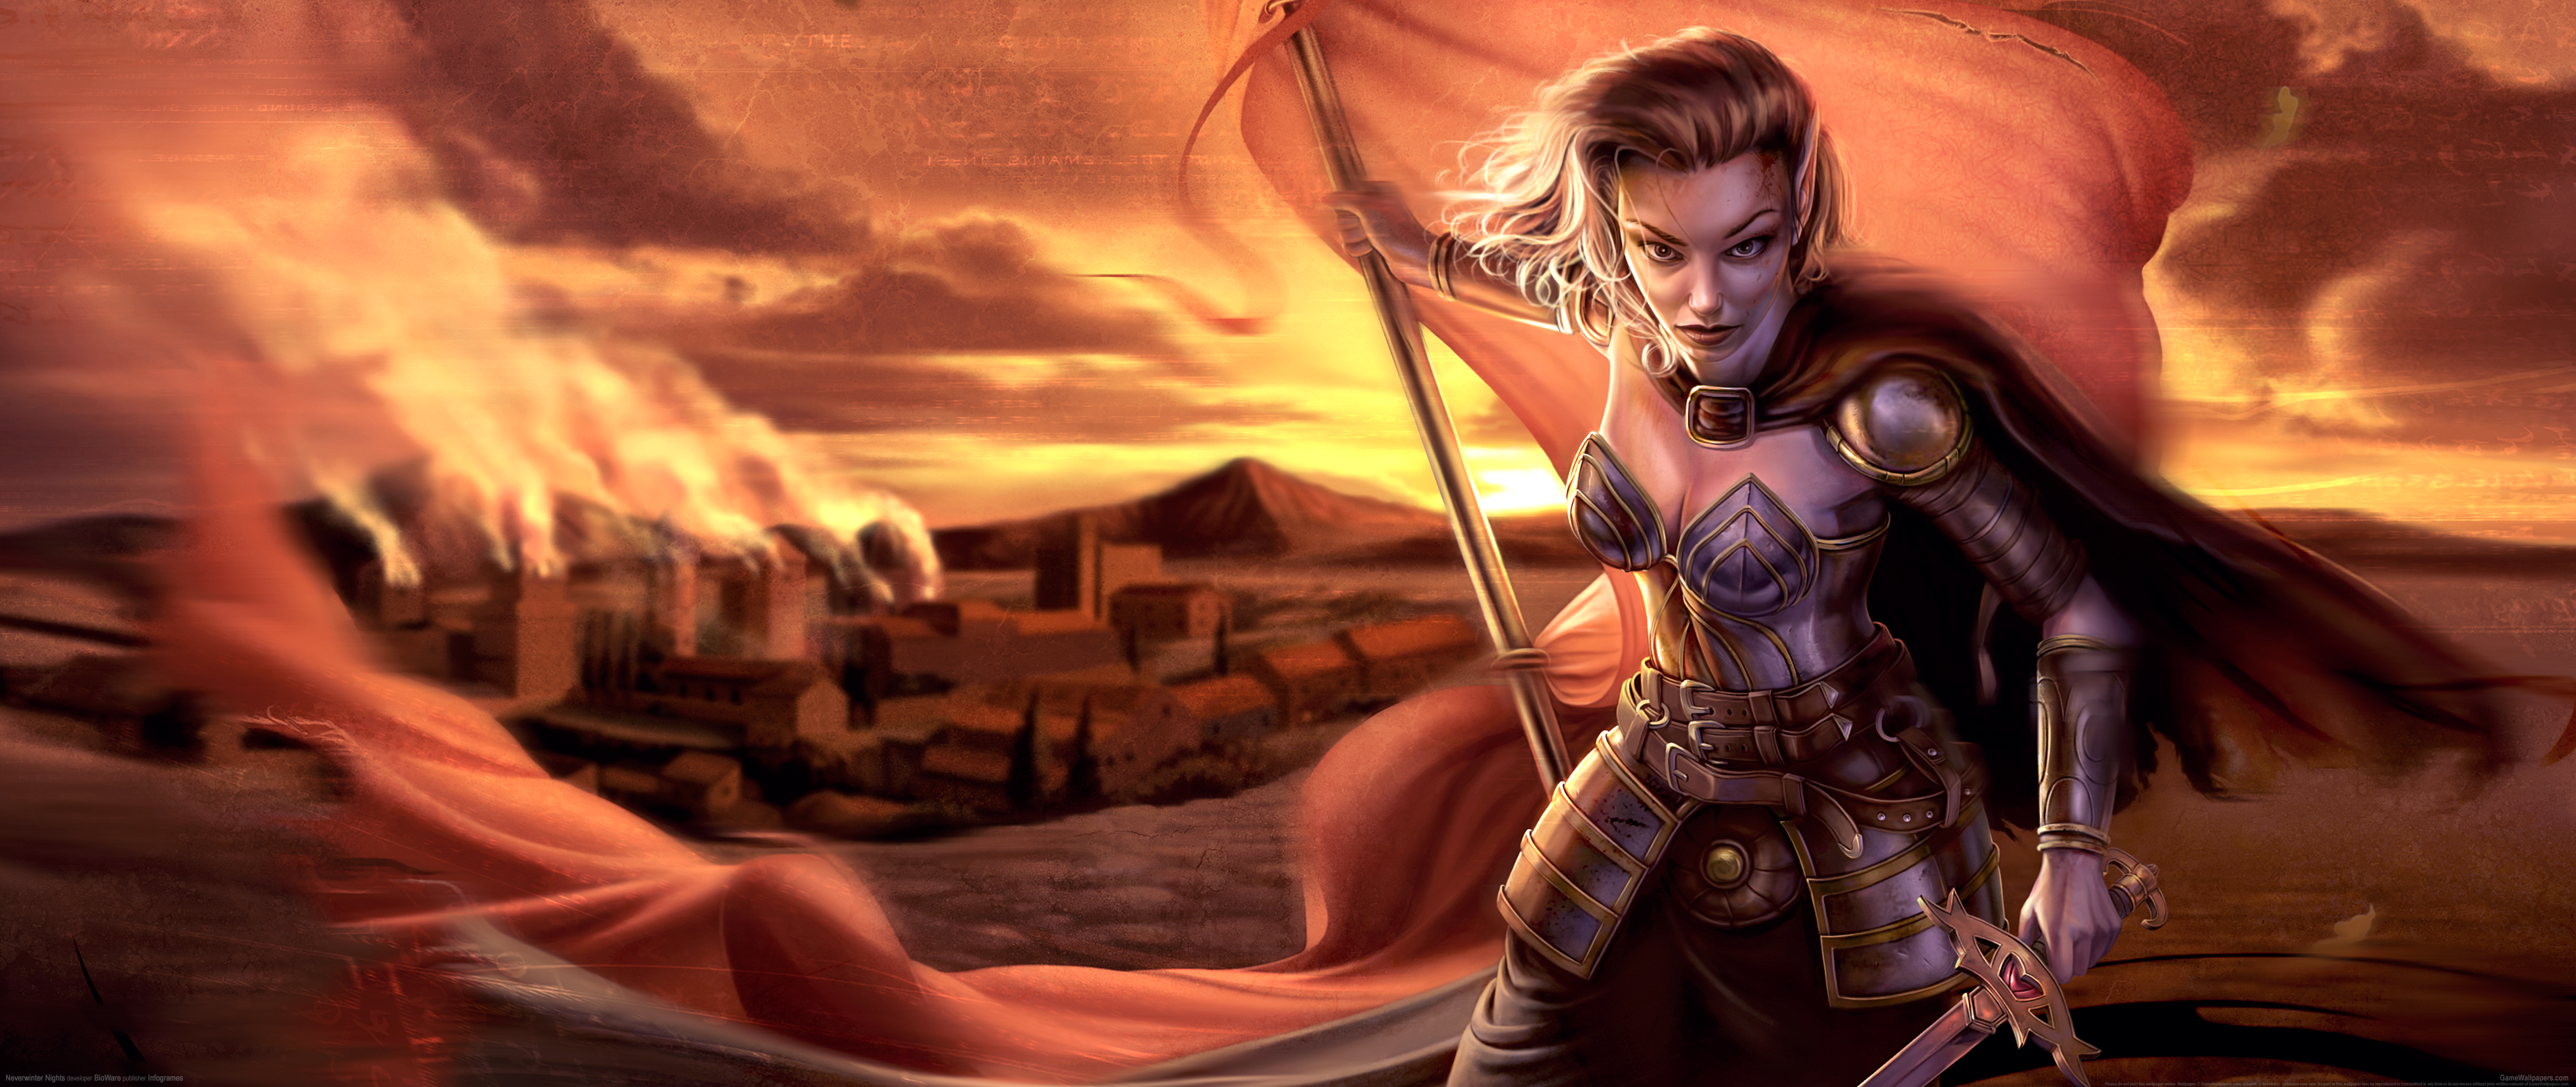 Neverwinter Nights 5120x2160 wallpaper or background 11